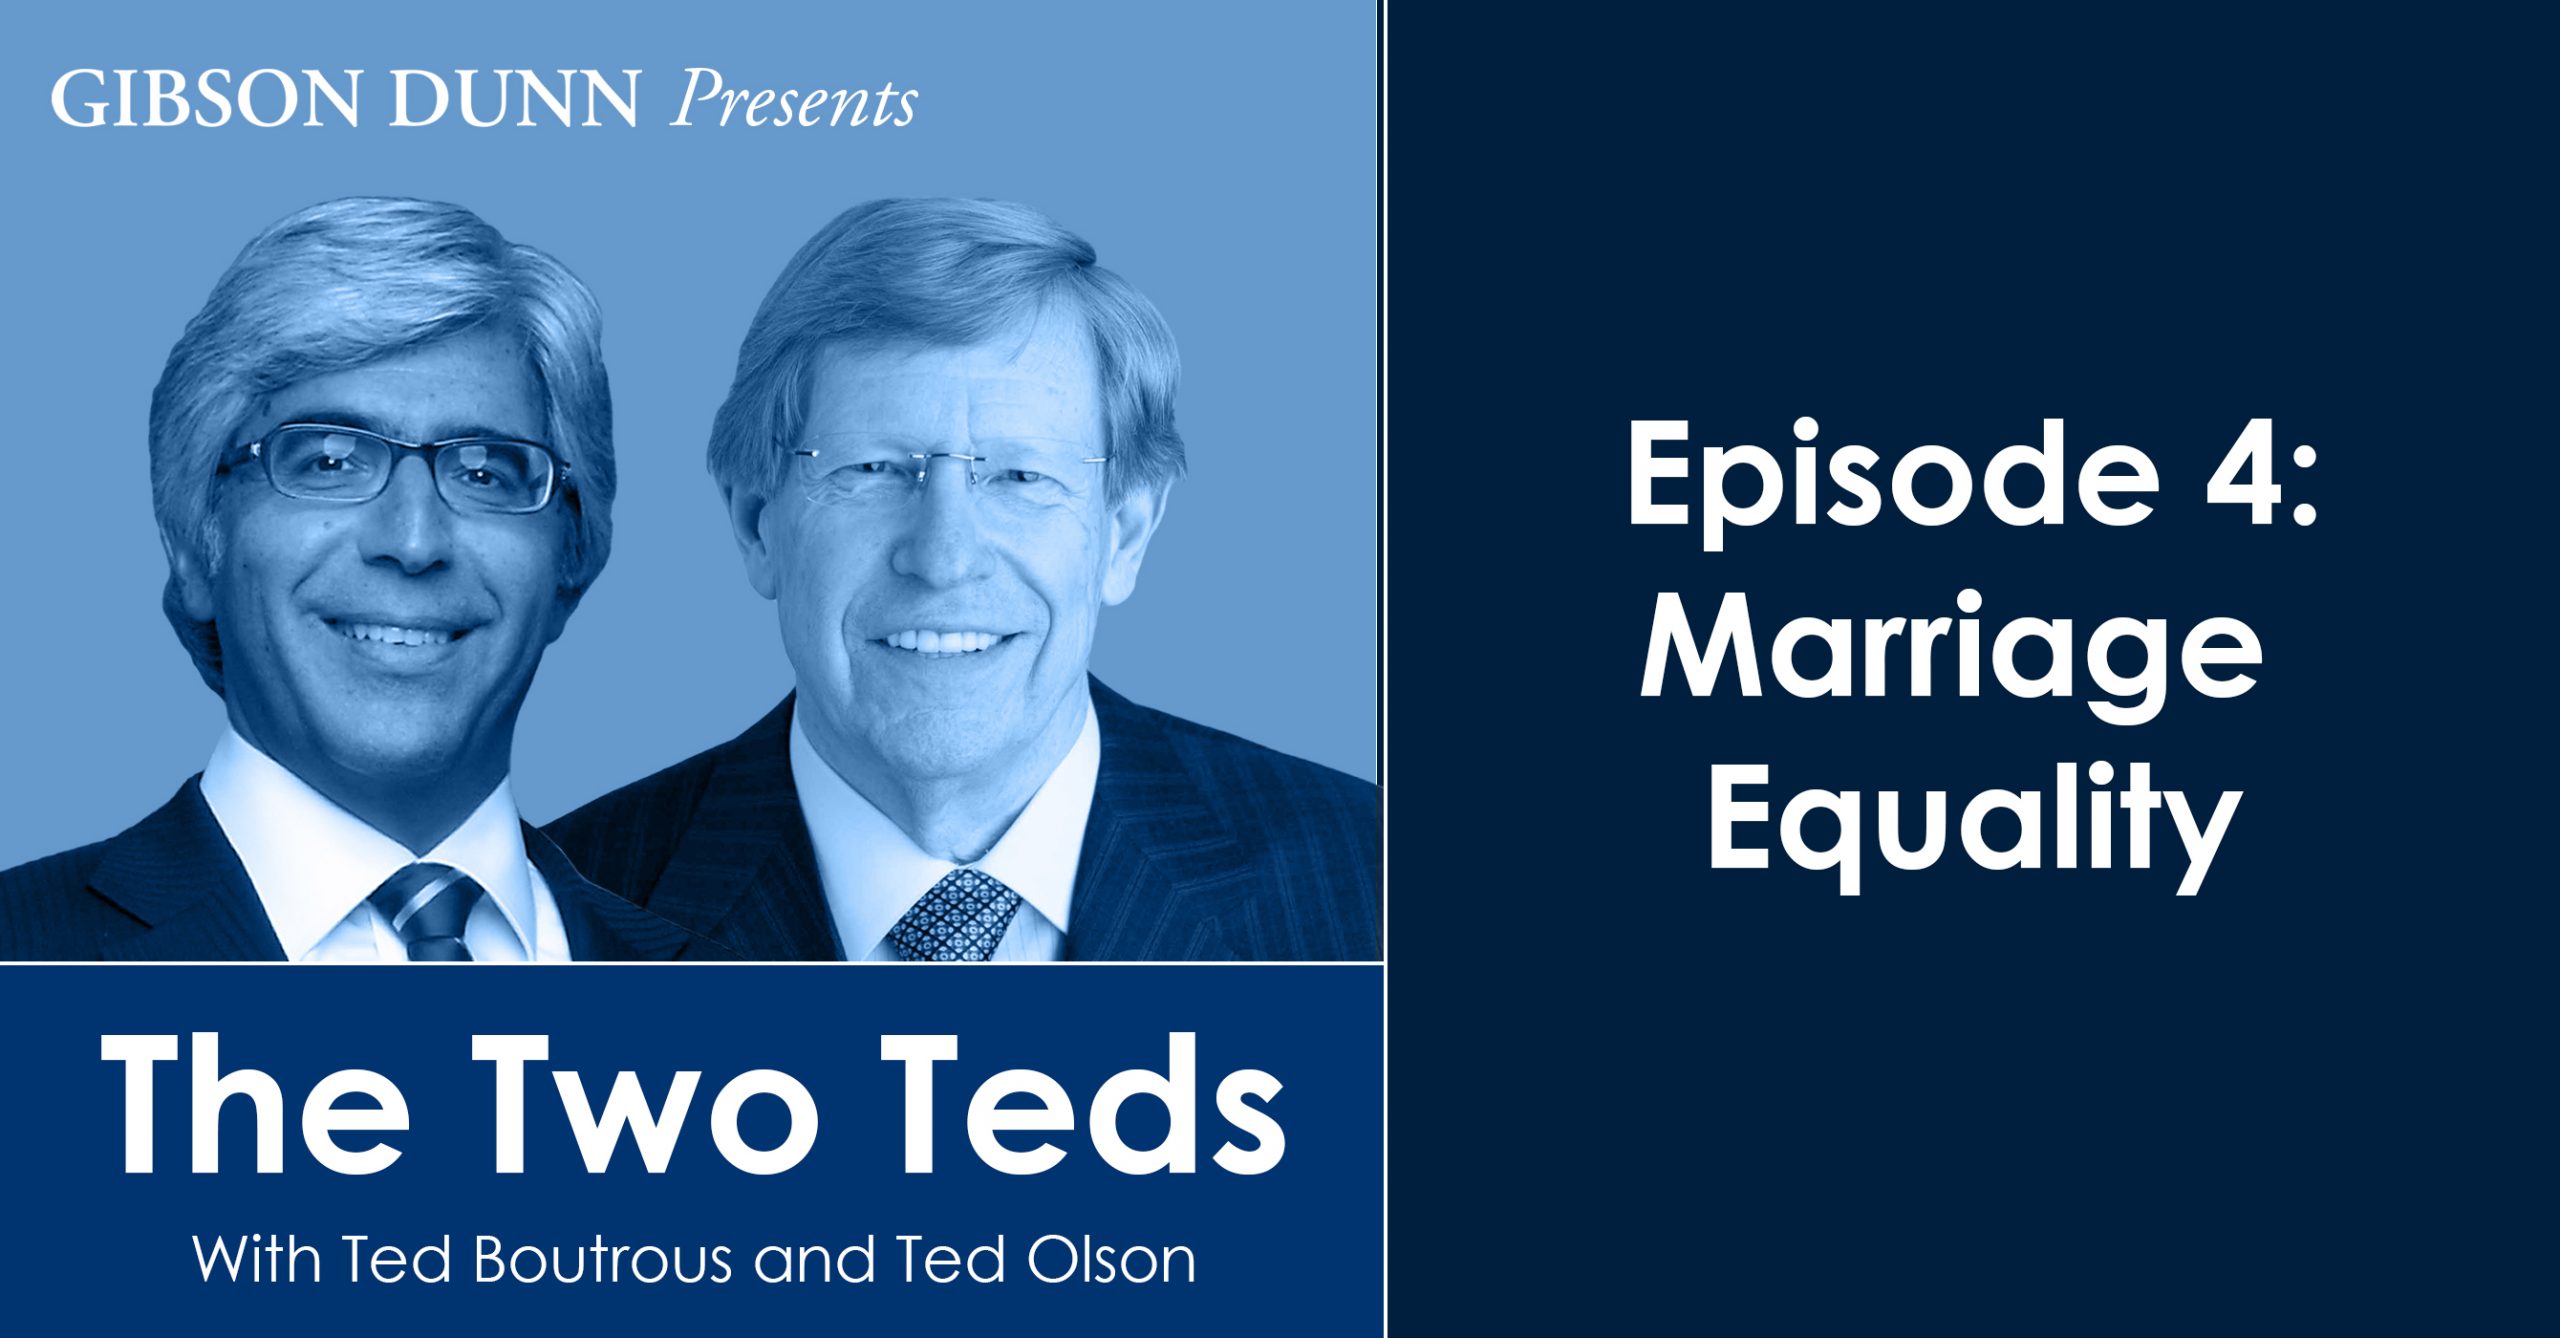 maler Burma Teenager The Two Teds - Episode 4 - Marriage Equality - Gibson Dunn